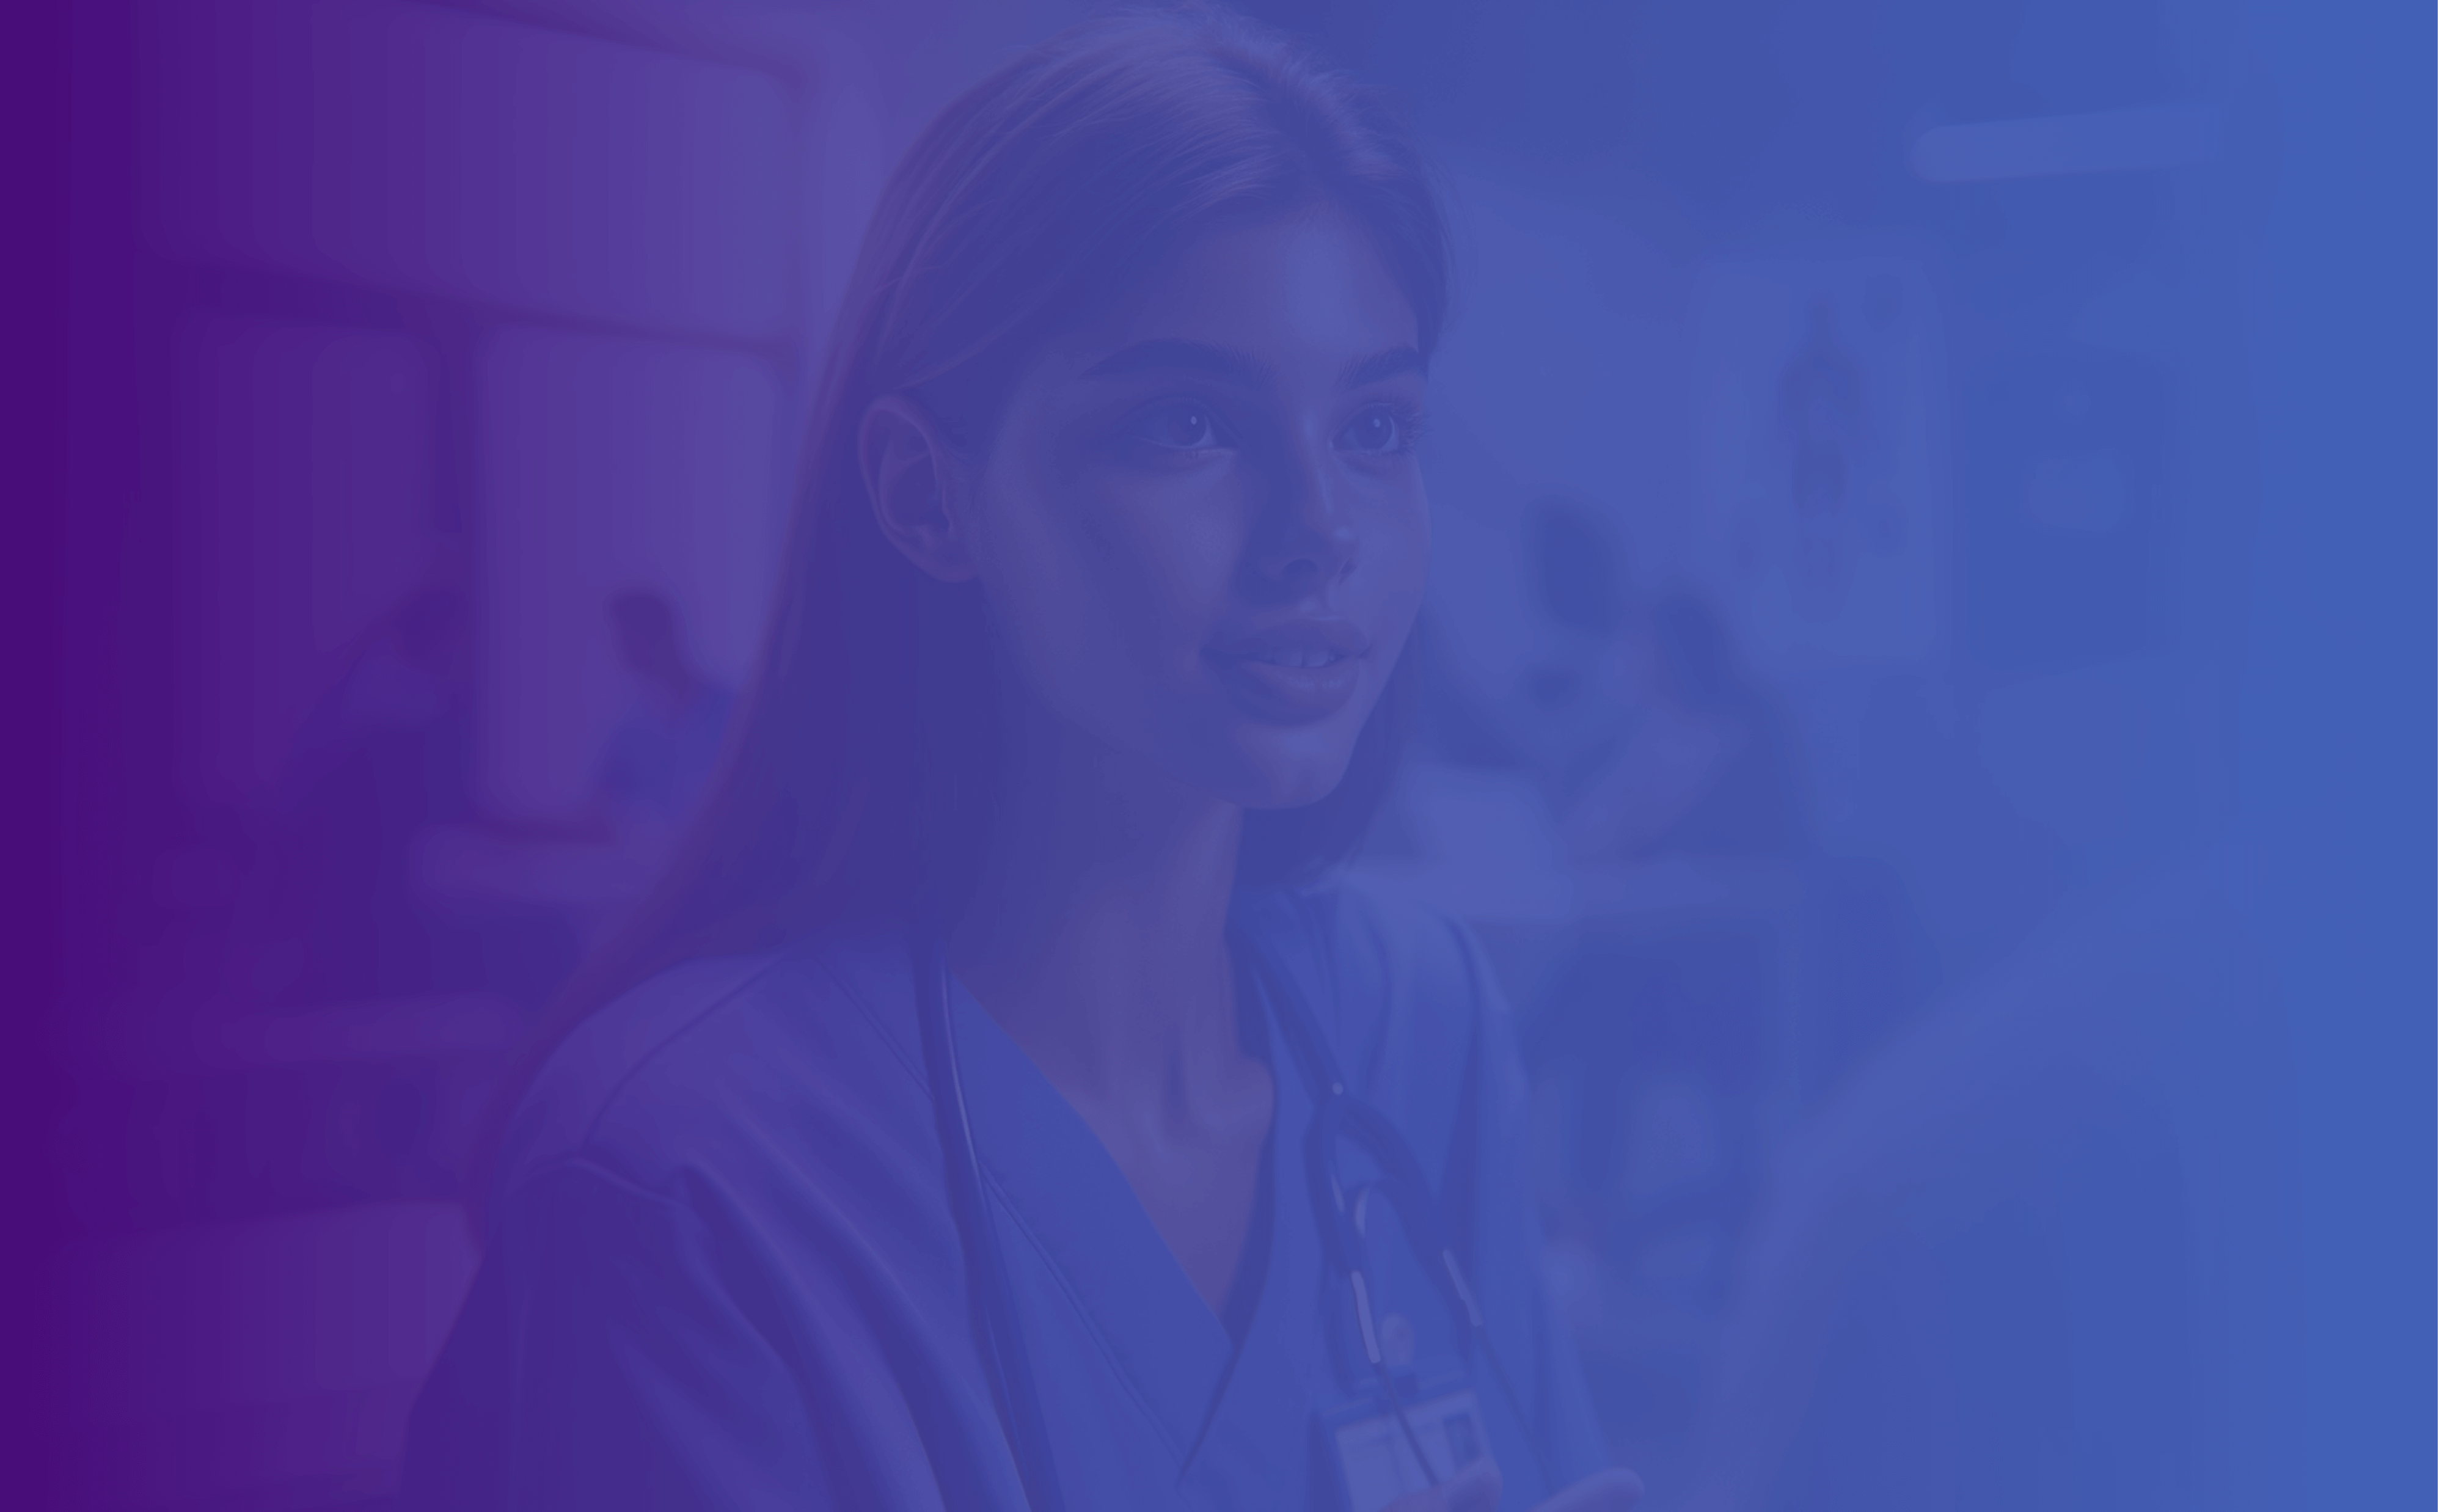 A young female medical professional in a blue scrubs uniform is attentively listening to someone off-camera, with a hospital setting and other medical staff in the blurred background.